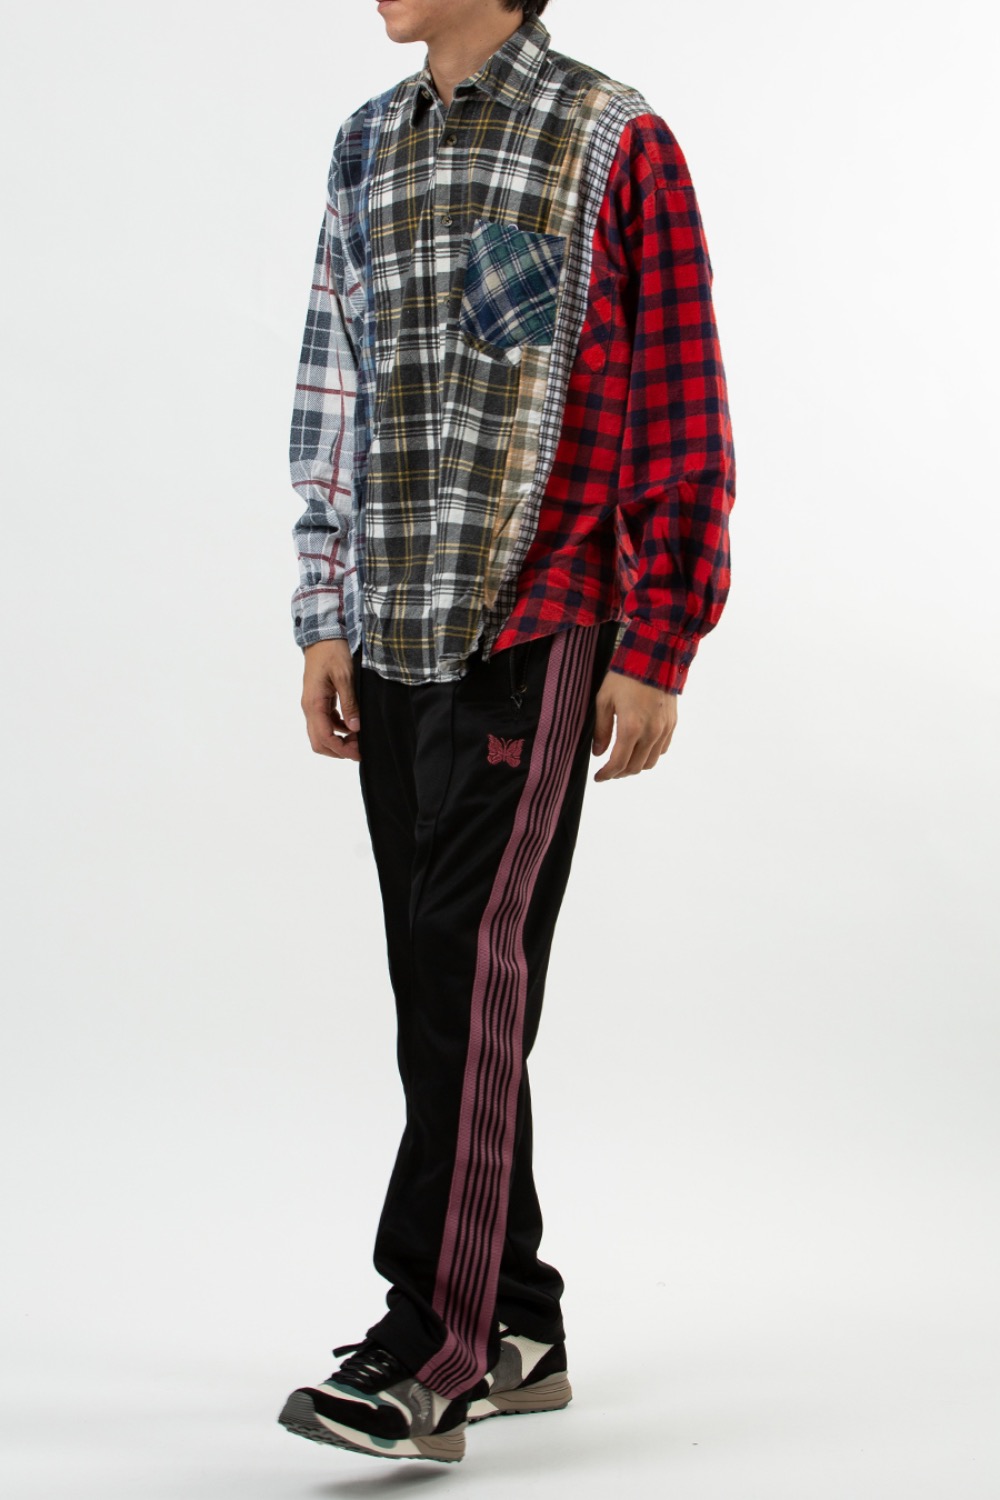 (22FW) - LQ306 Rebuild by Needles Flannel Shirt -&gt; 7 Cuts Wide Shirt (FREE - 1) ASSORTED